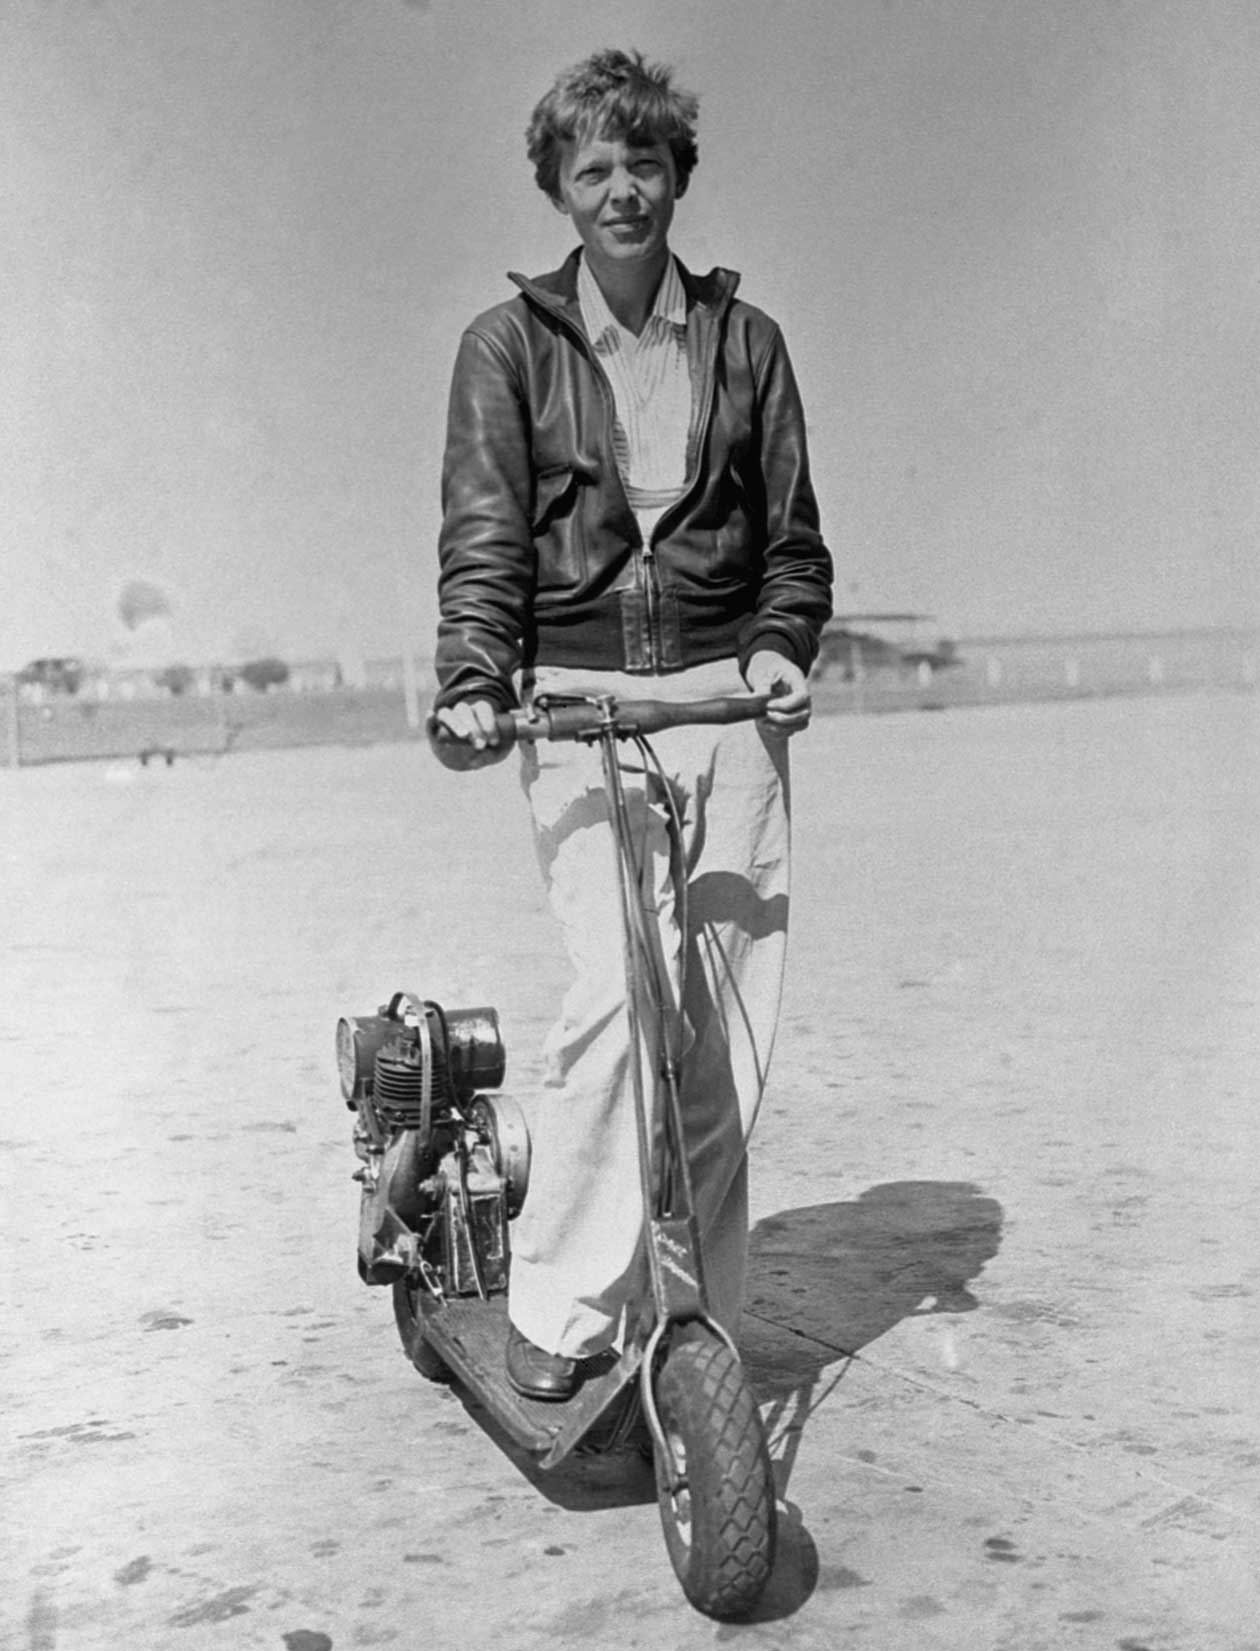 Amelia Earhart and a motorized scooter in the 1930's.jpg